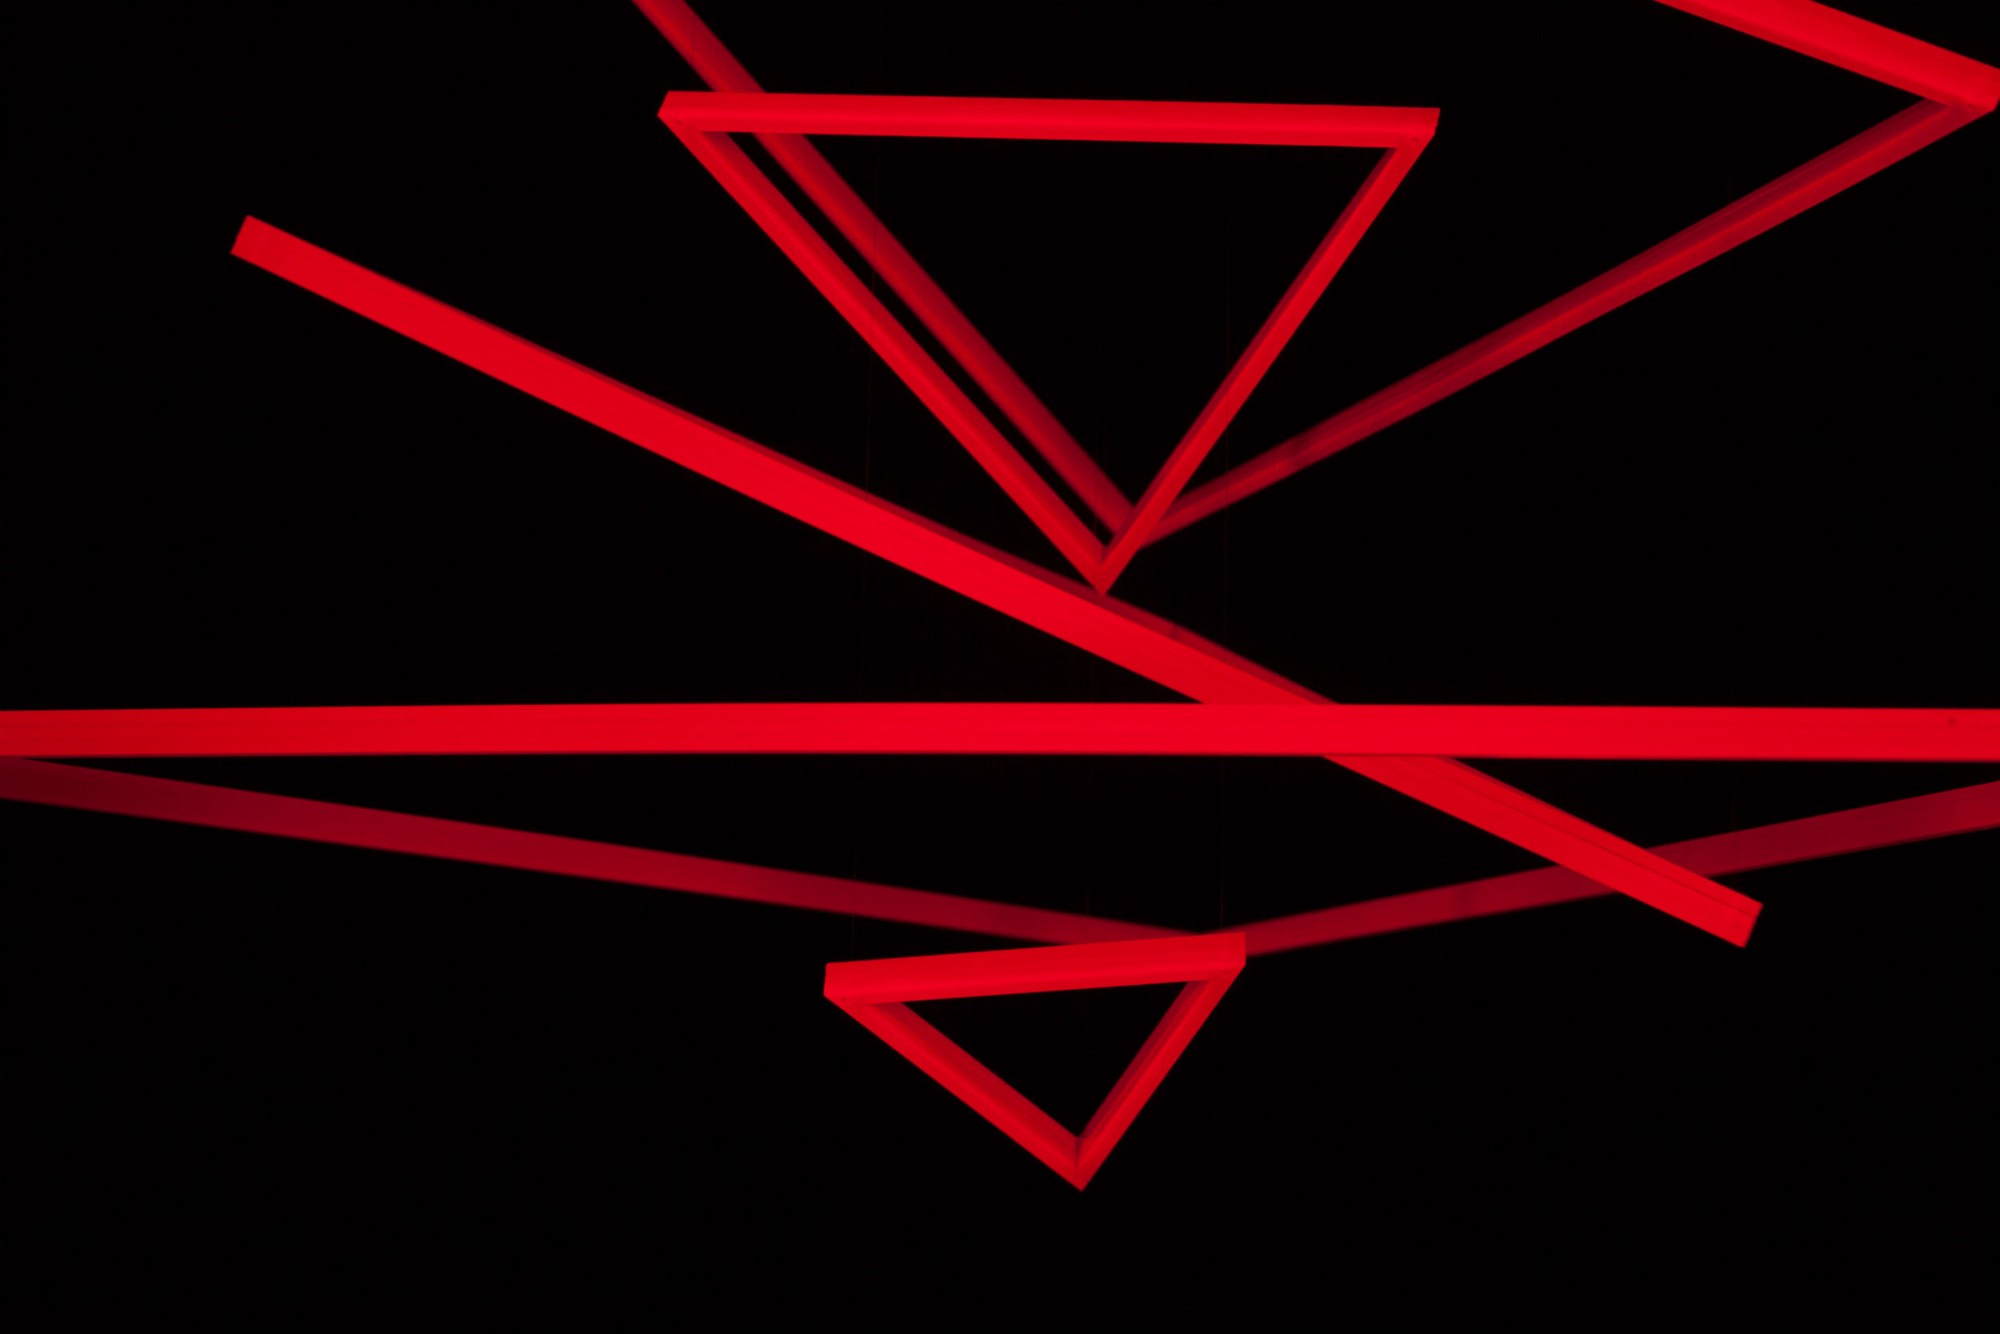 Trianguconcentricos_Rouge_Fluo_4.jpg